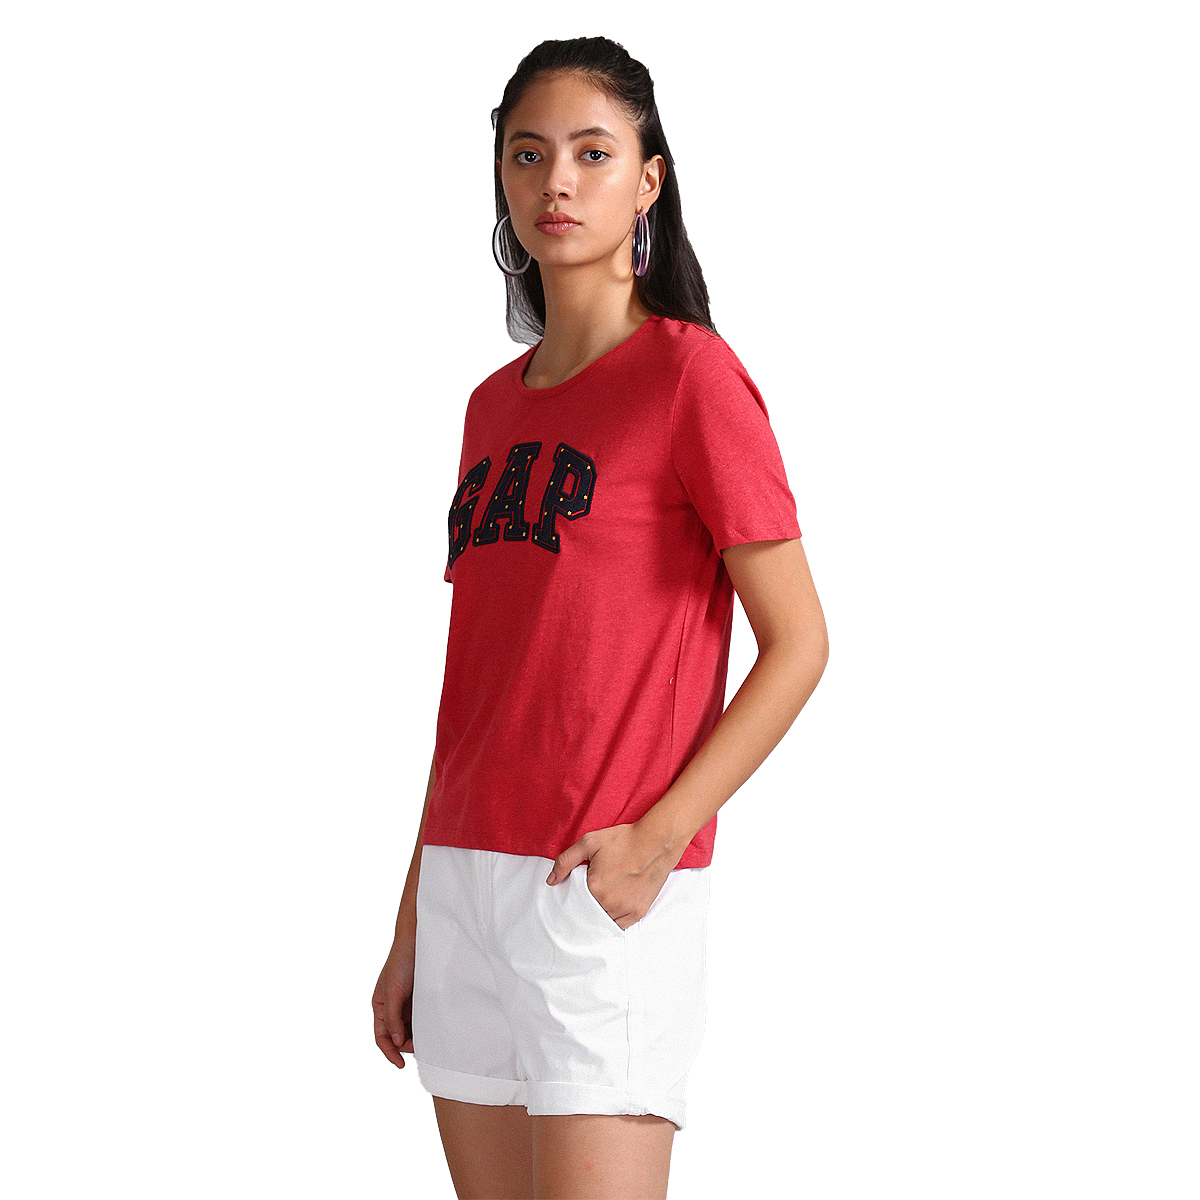 Gap Solid Color Round Neck Short Sleeve T-Shirt Styled with Logo Applique - Red